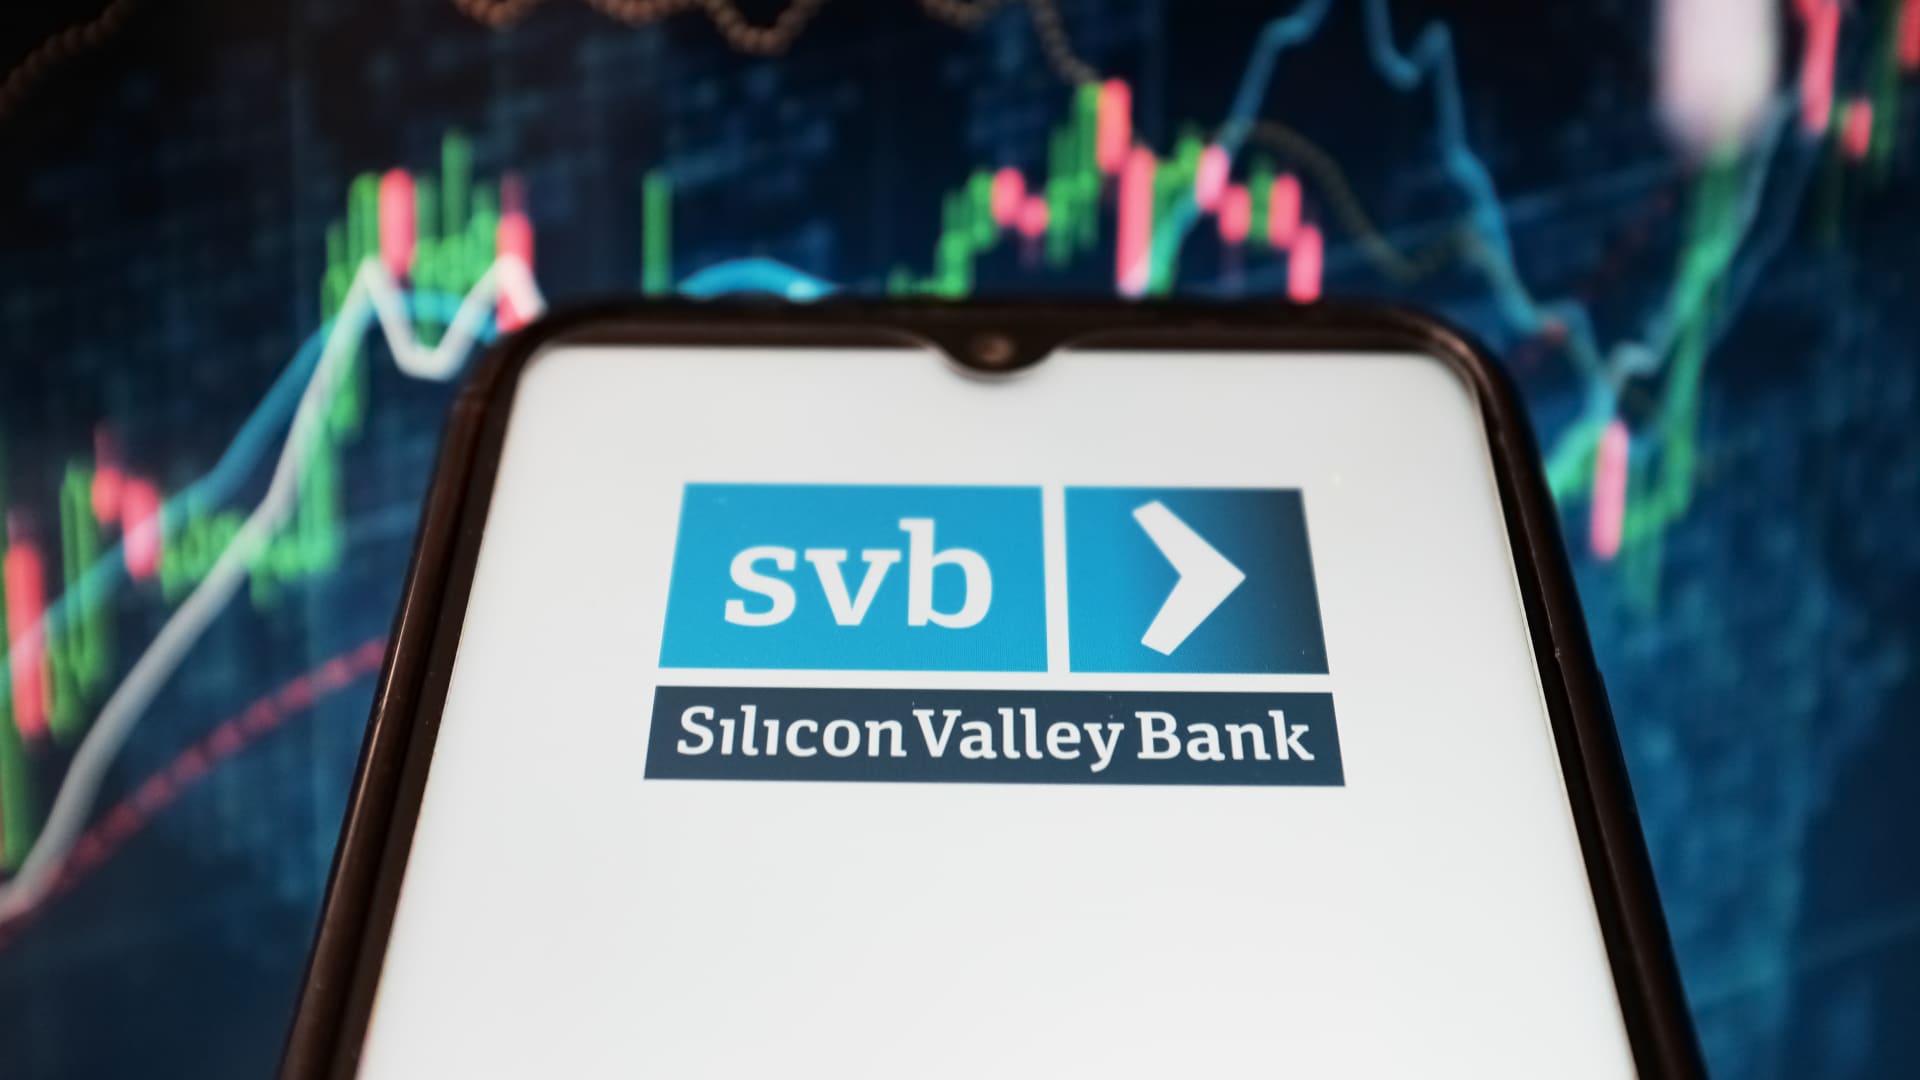 SVB’s tech failings were a problem long before the bank run that led to its demise, critics say